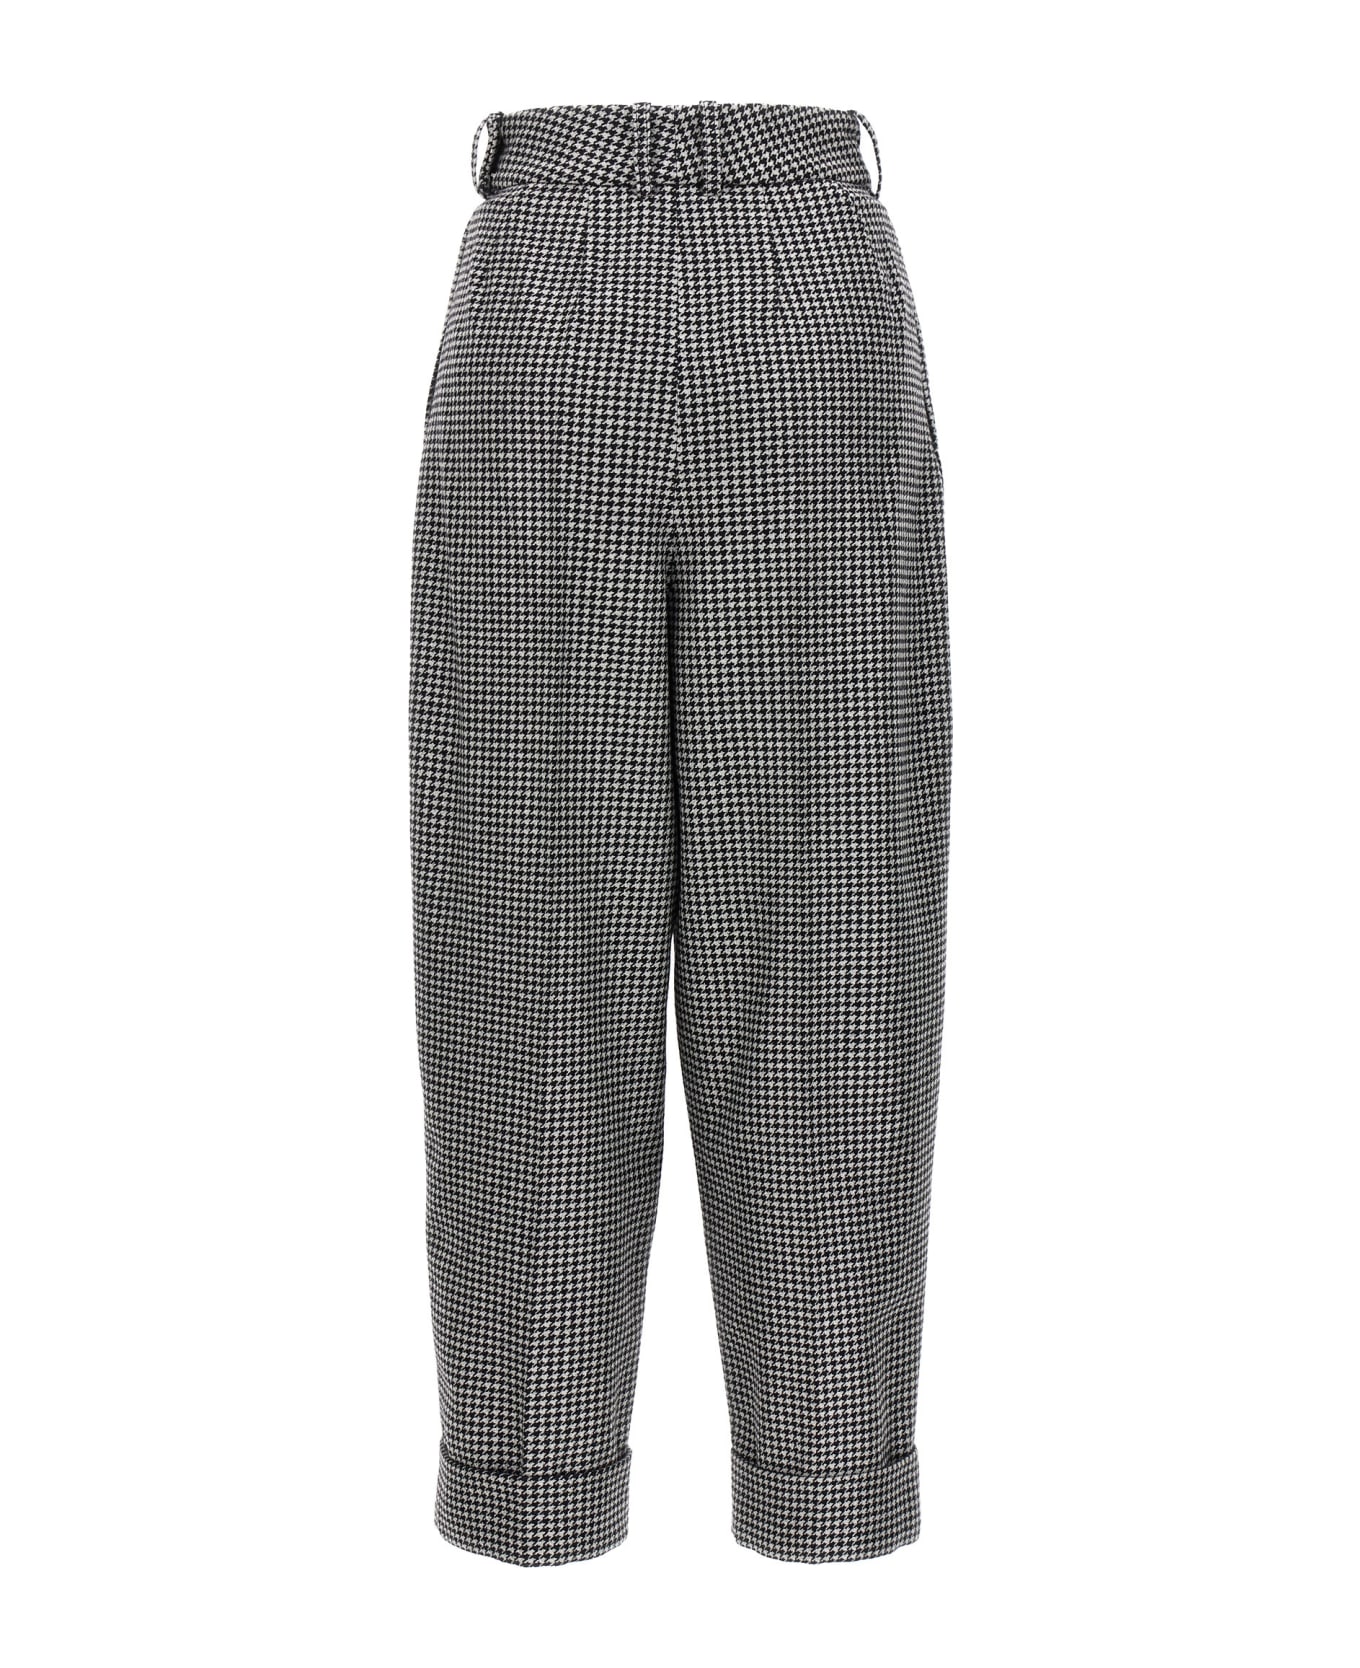 Alexandre Vauthier Metal Houndstooth Trousers - White/Black ボトムス